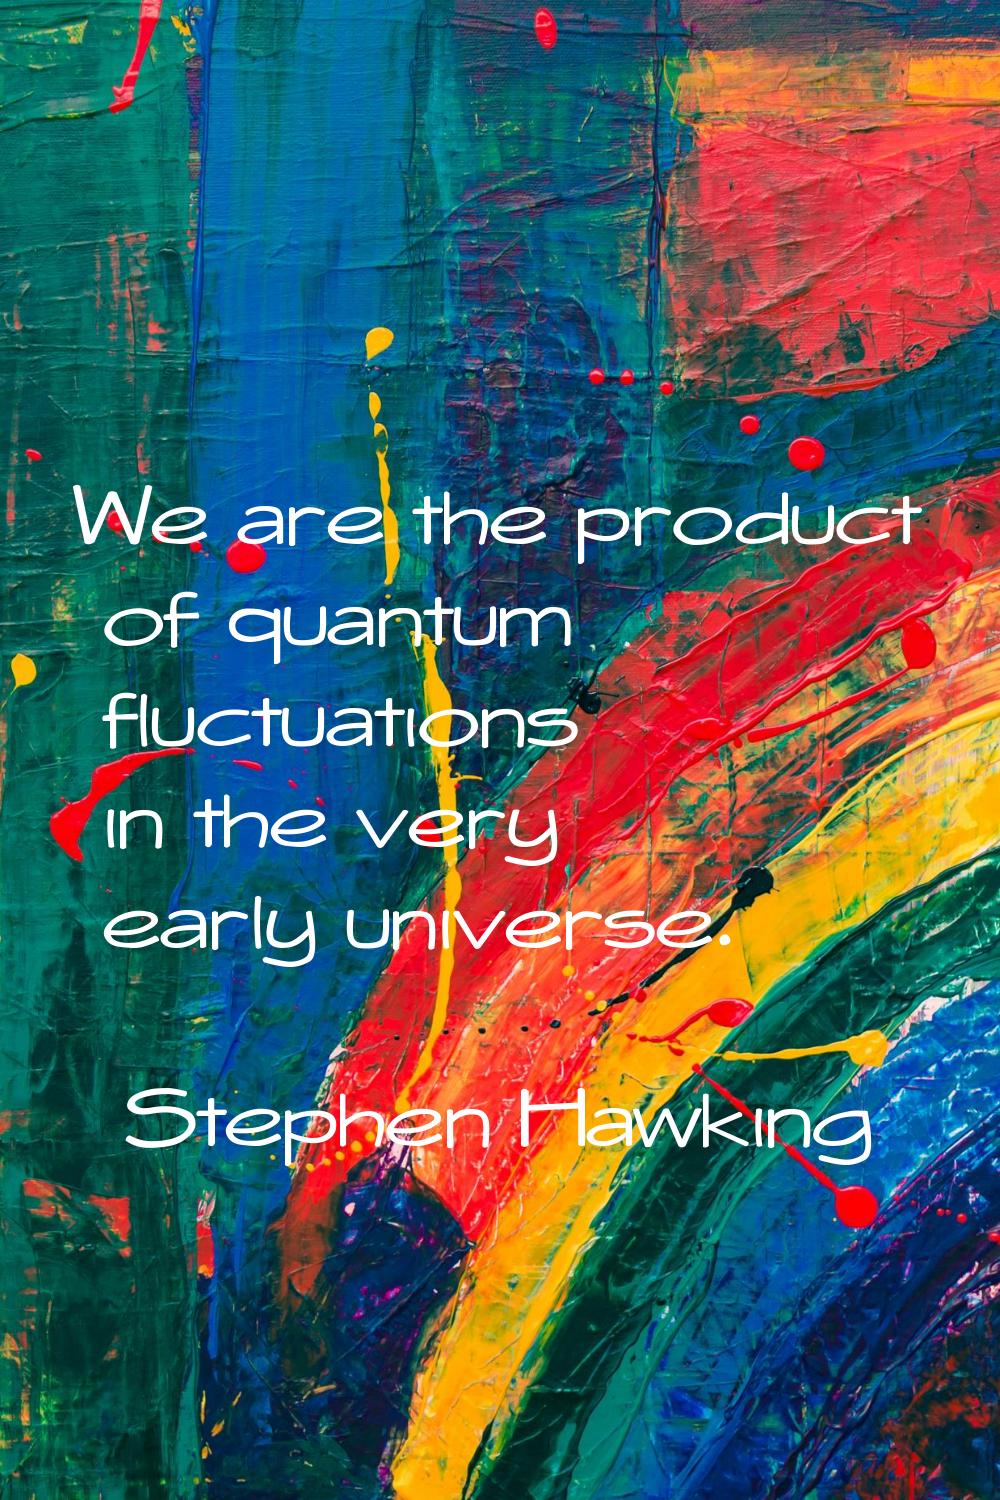 We are the product of quantum fluctuations in the very early universe.